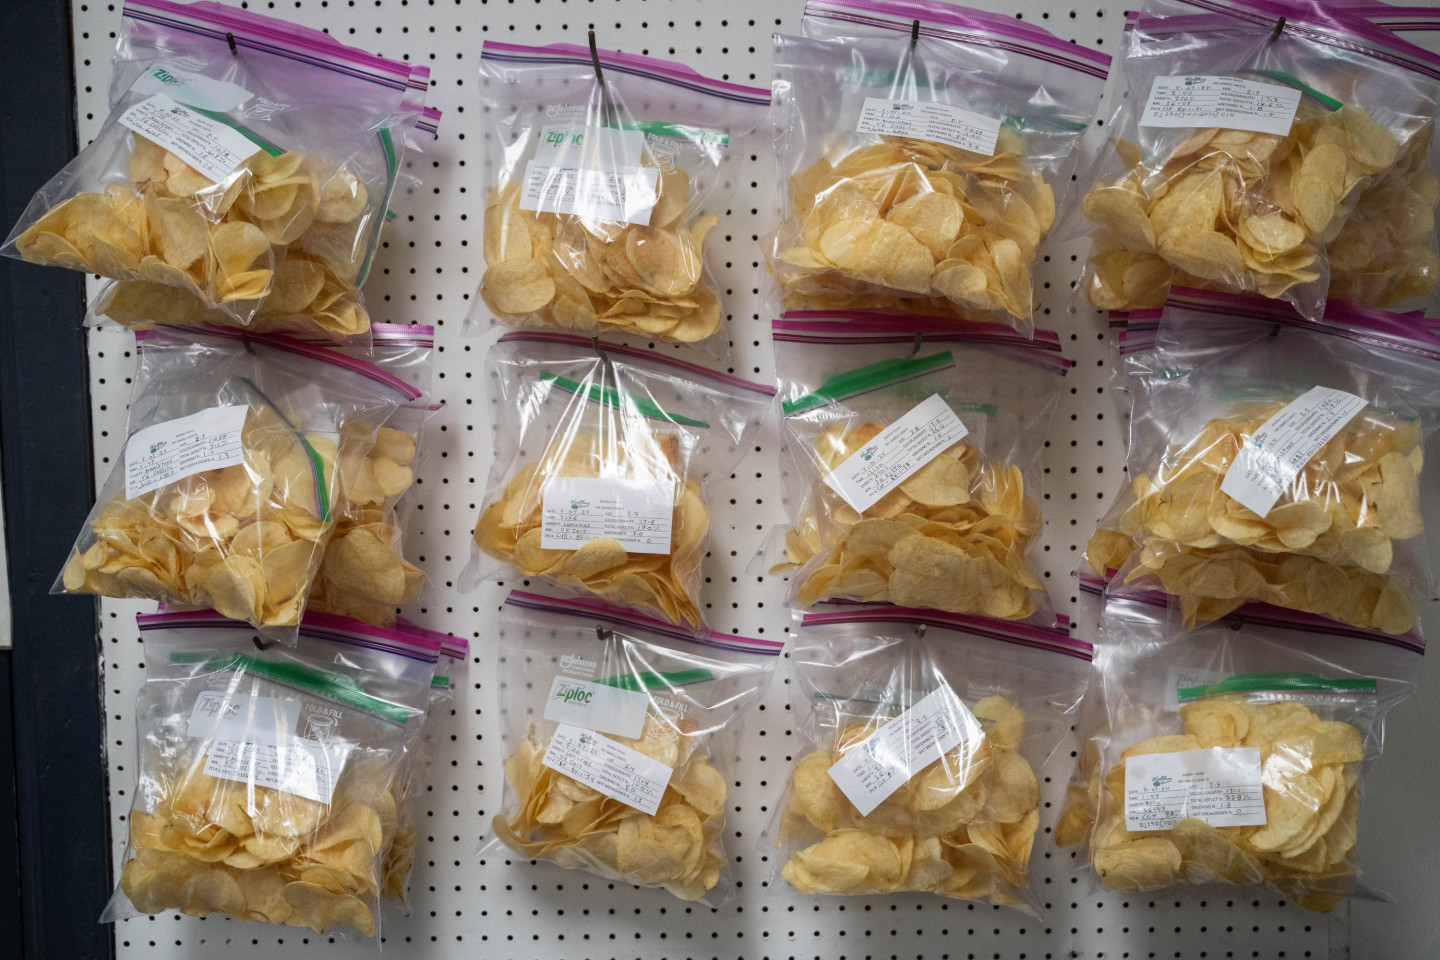 Bags of chips hang on a wall.